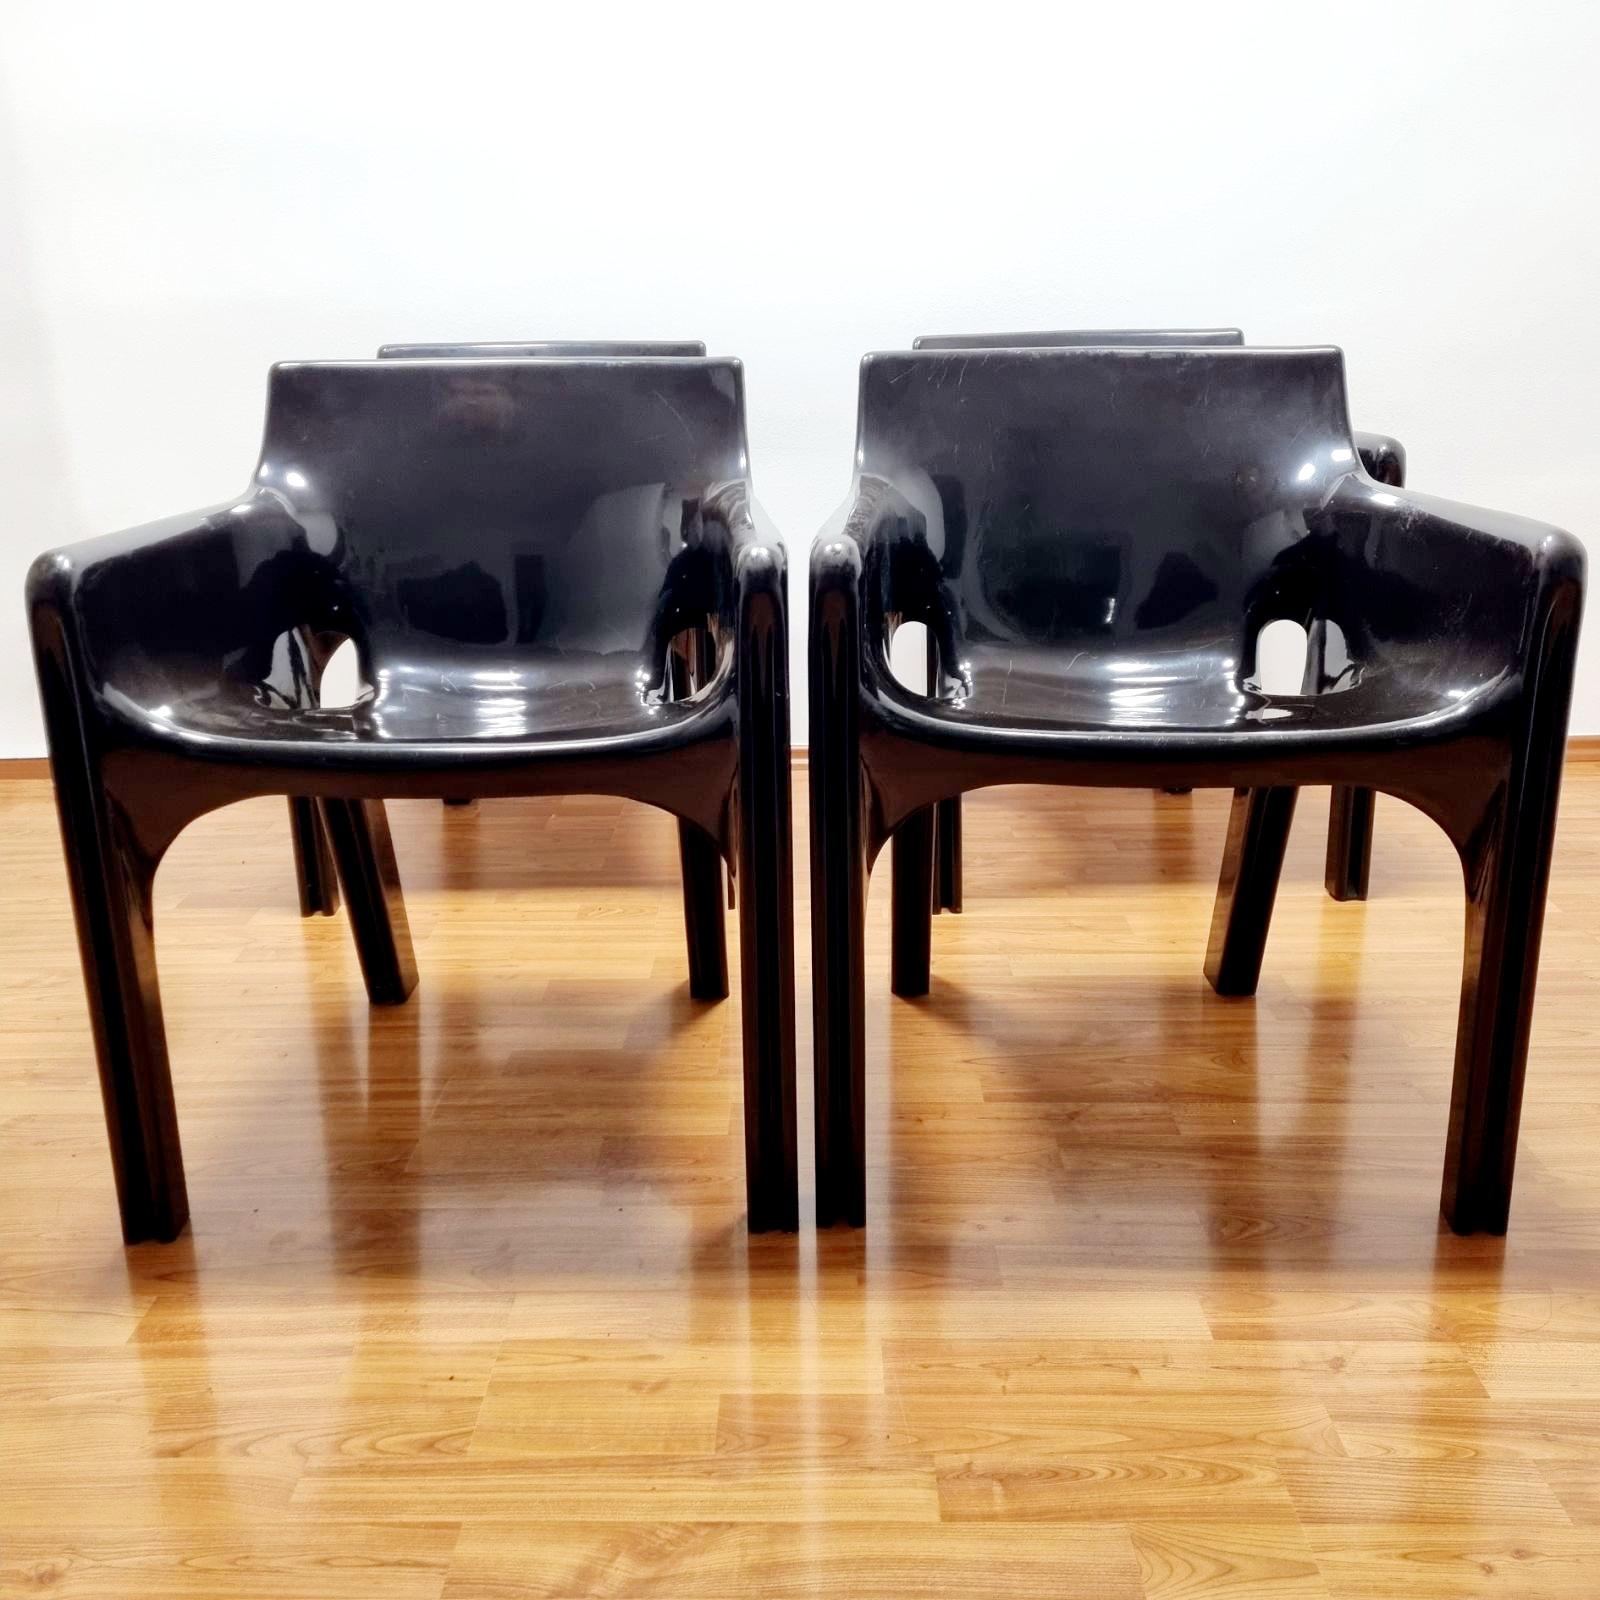 Mid-20th Century Set of 4 Italian Gaudi Chairs by Vico Magistretti for Artemide, Italy 70s For Sale